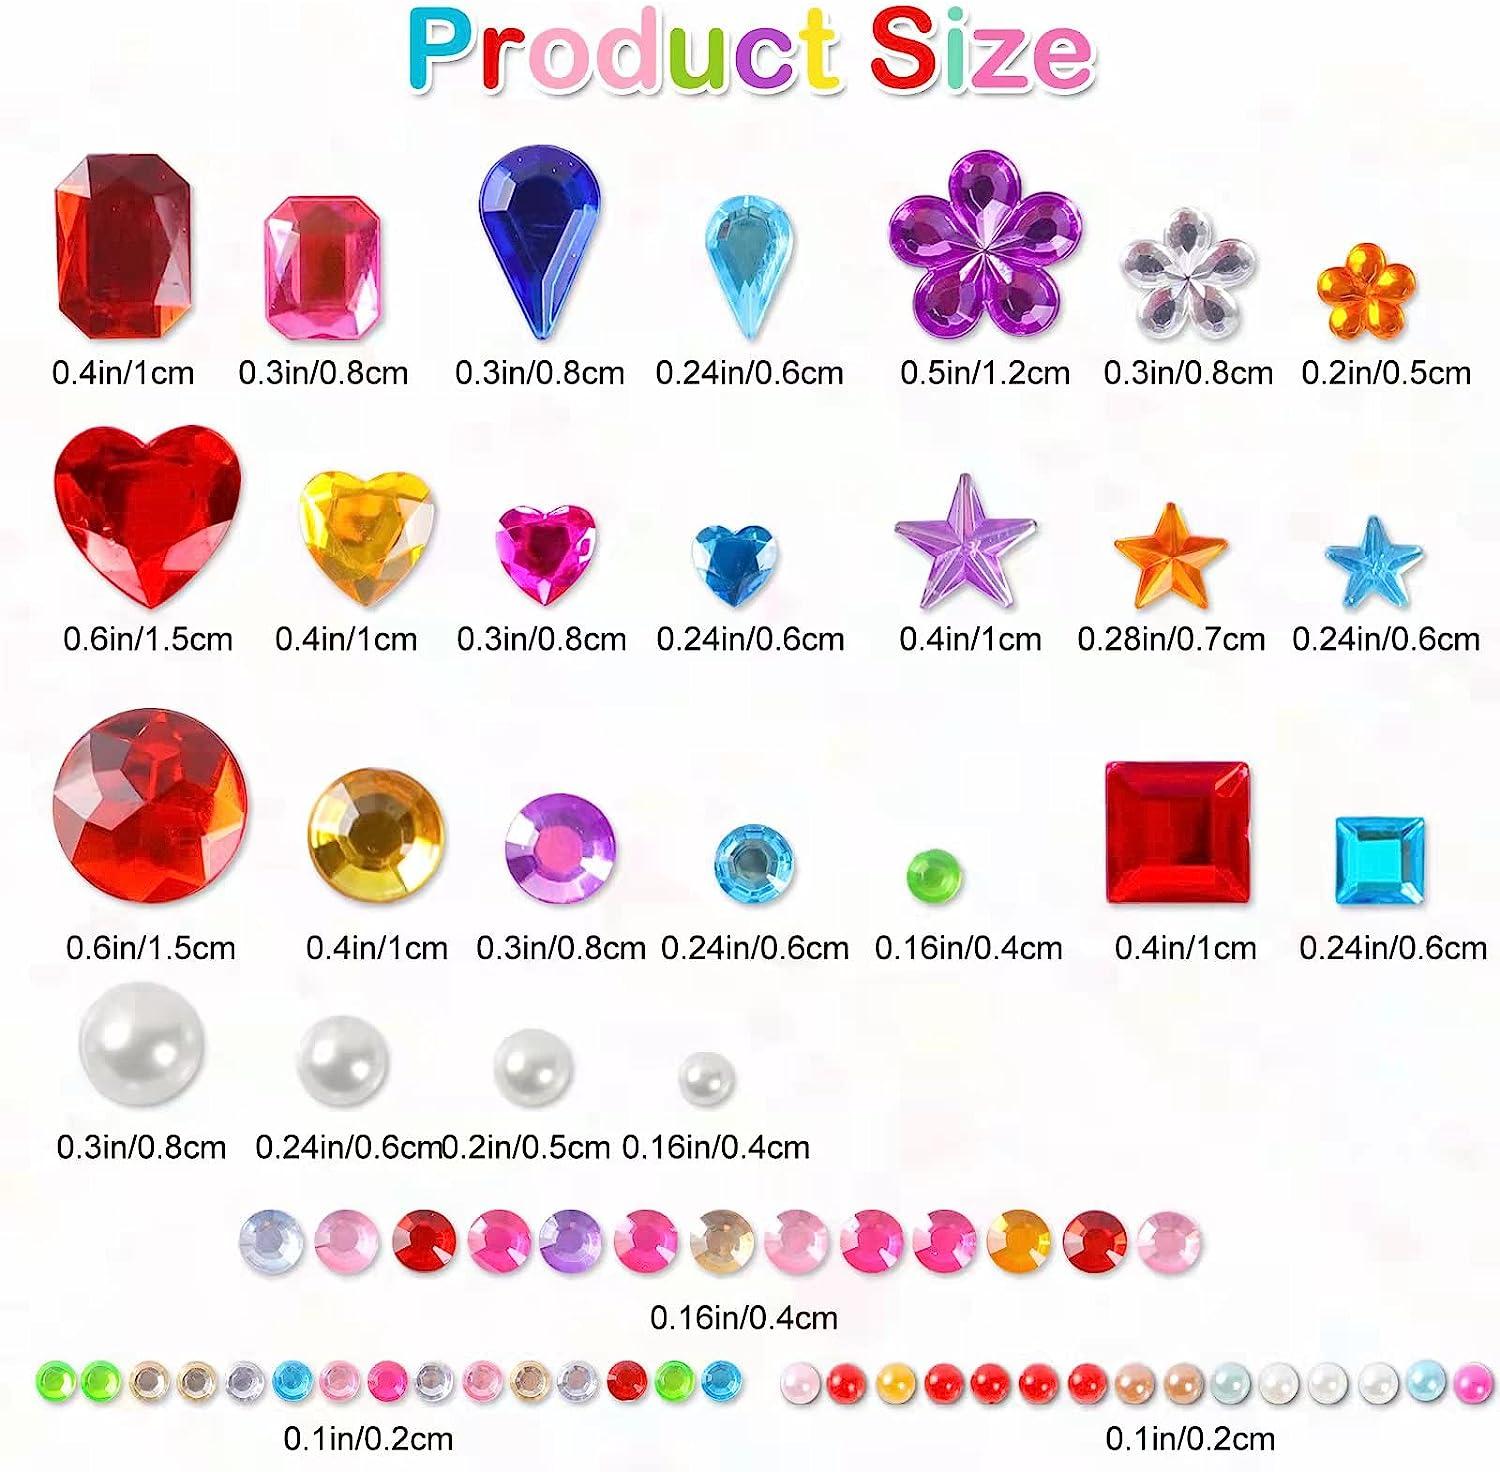 MYDBUYSOME 2774pcs Gem Stickers Jewels for Crafts - Self Adhesive